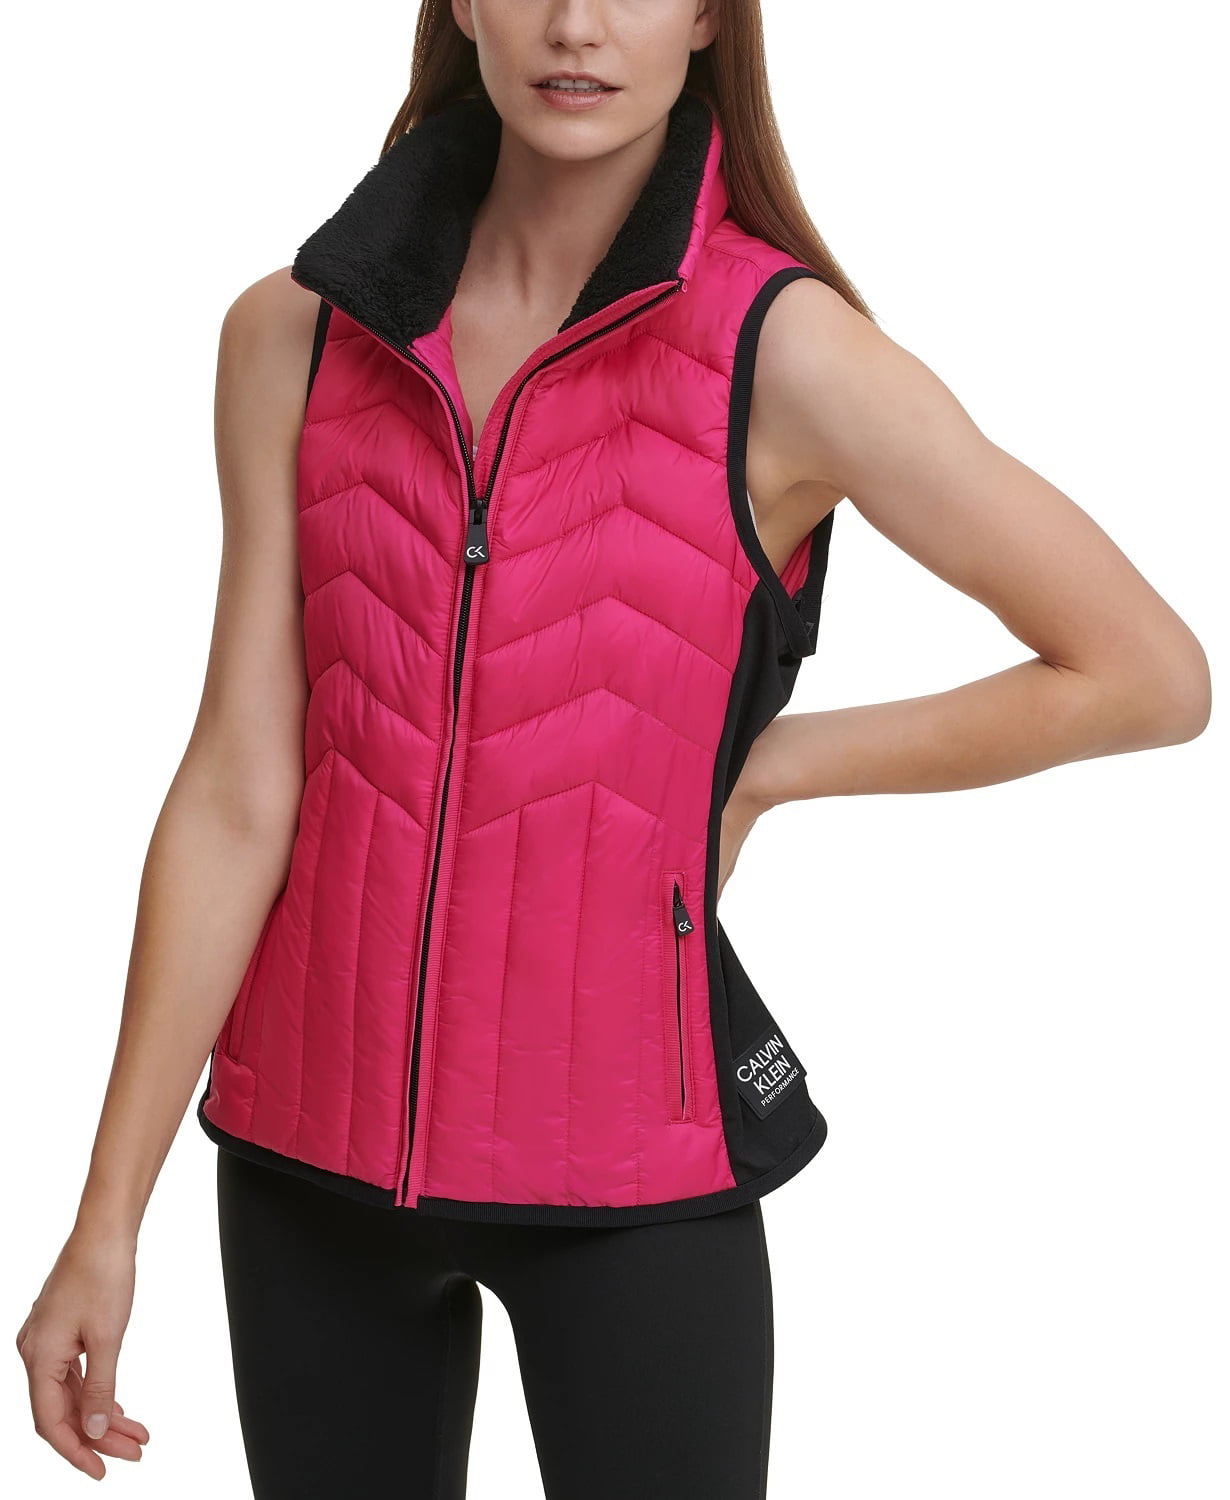 Calvin Klein Performance Women's Bold Colorblocked Puffer Vest, Pink, Large  